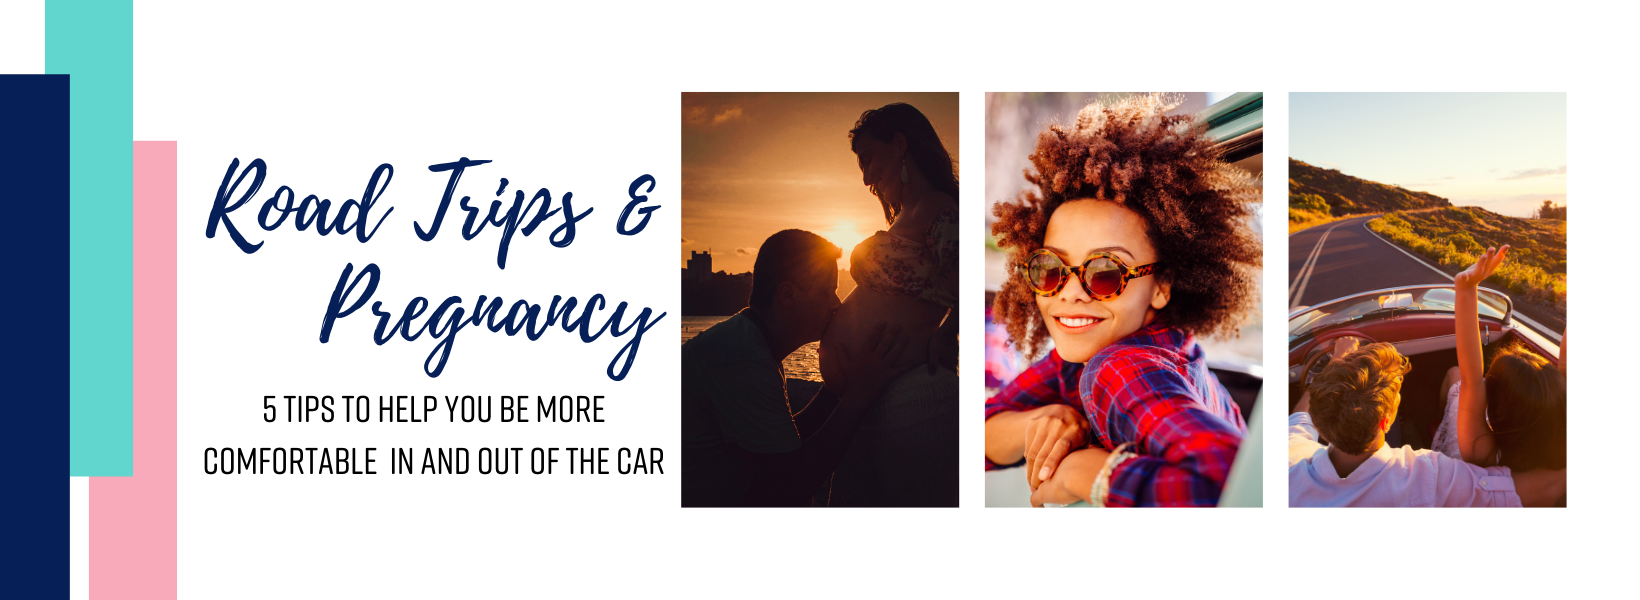 Road Trips & Pregnancy: 5 Tips to Stay Comfortable